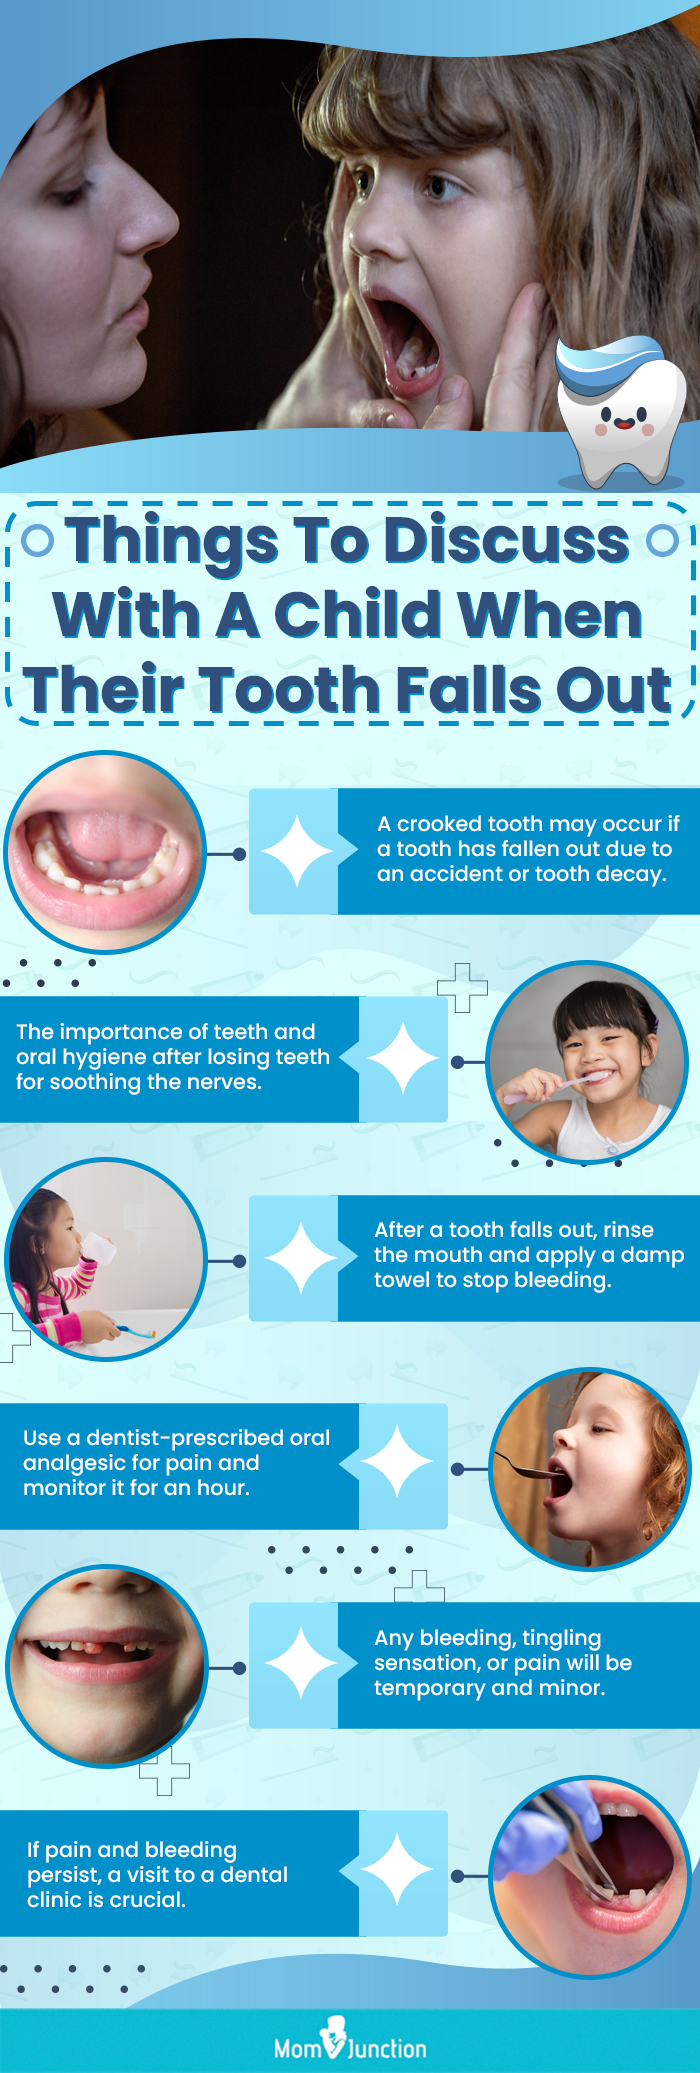 things to discuss with a child when their tooth falls out(infographic)